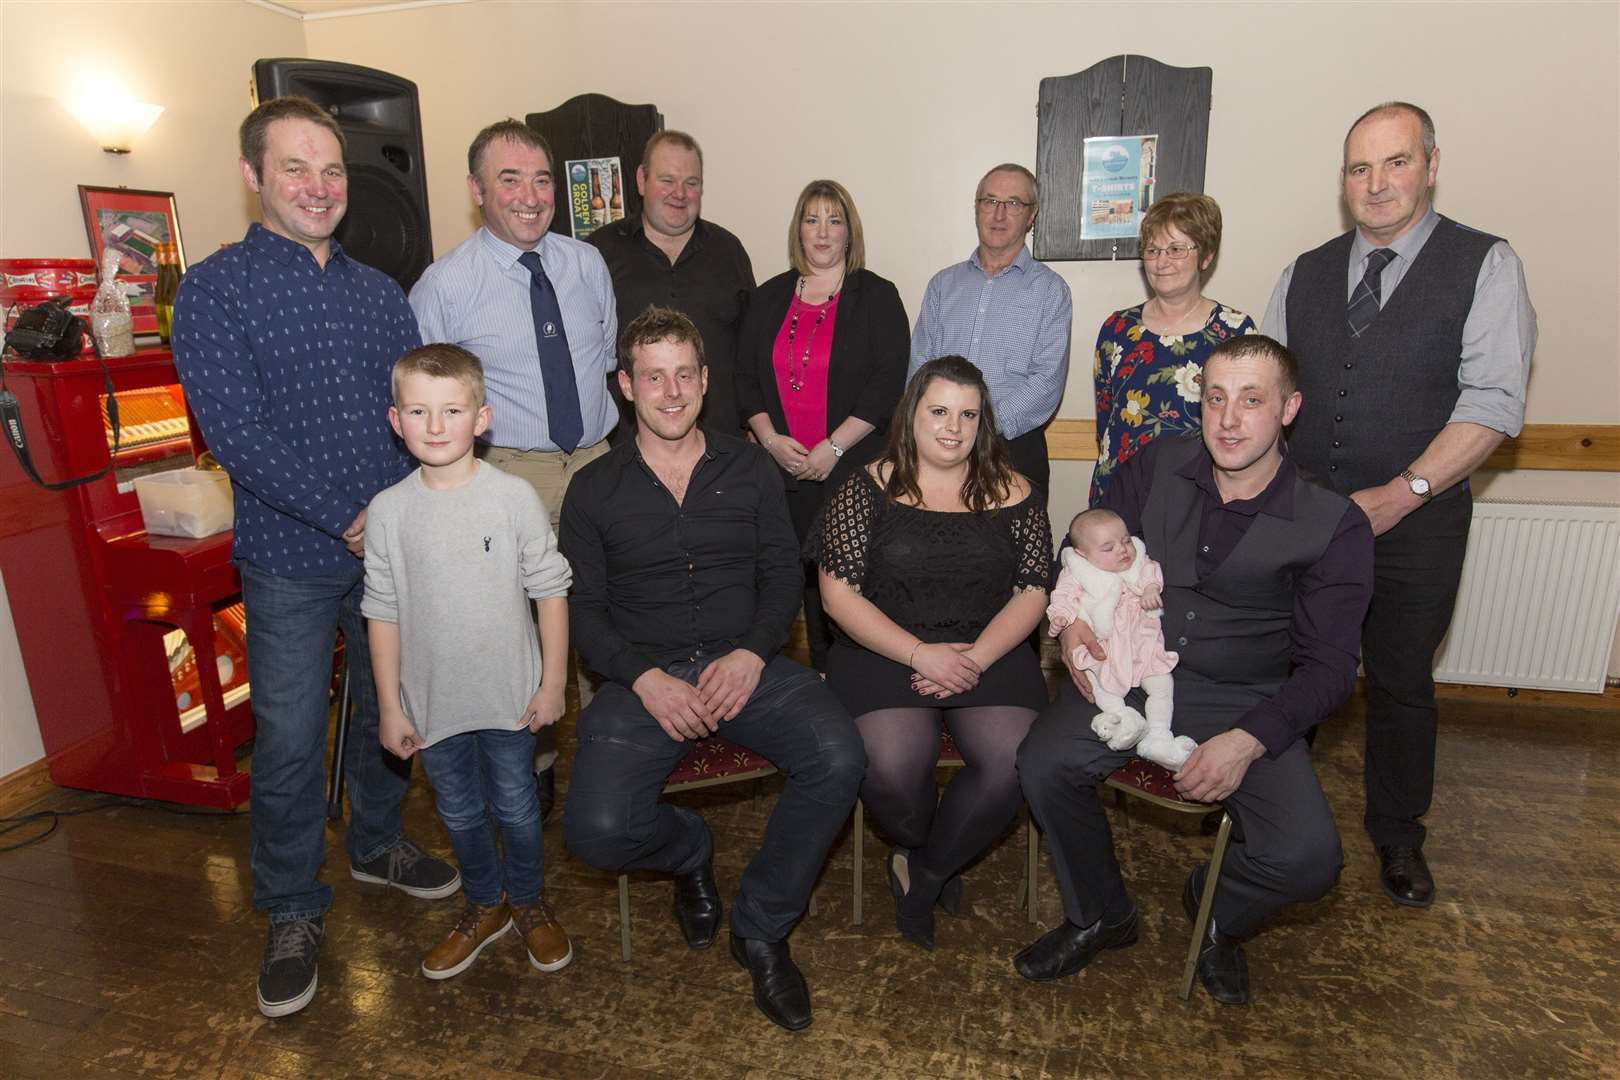 Canisbay Show chairman Stuart Sinclair (seated, left), secretary Leeann Hope (seated, centre) and vice-chairman Jamie Coghill, who was literally left holding the baby, 12-week-old Iona Mackay, while her parents joined some of the other show helpers in the back row. Picture: Robert MacDonald / Northern Studios